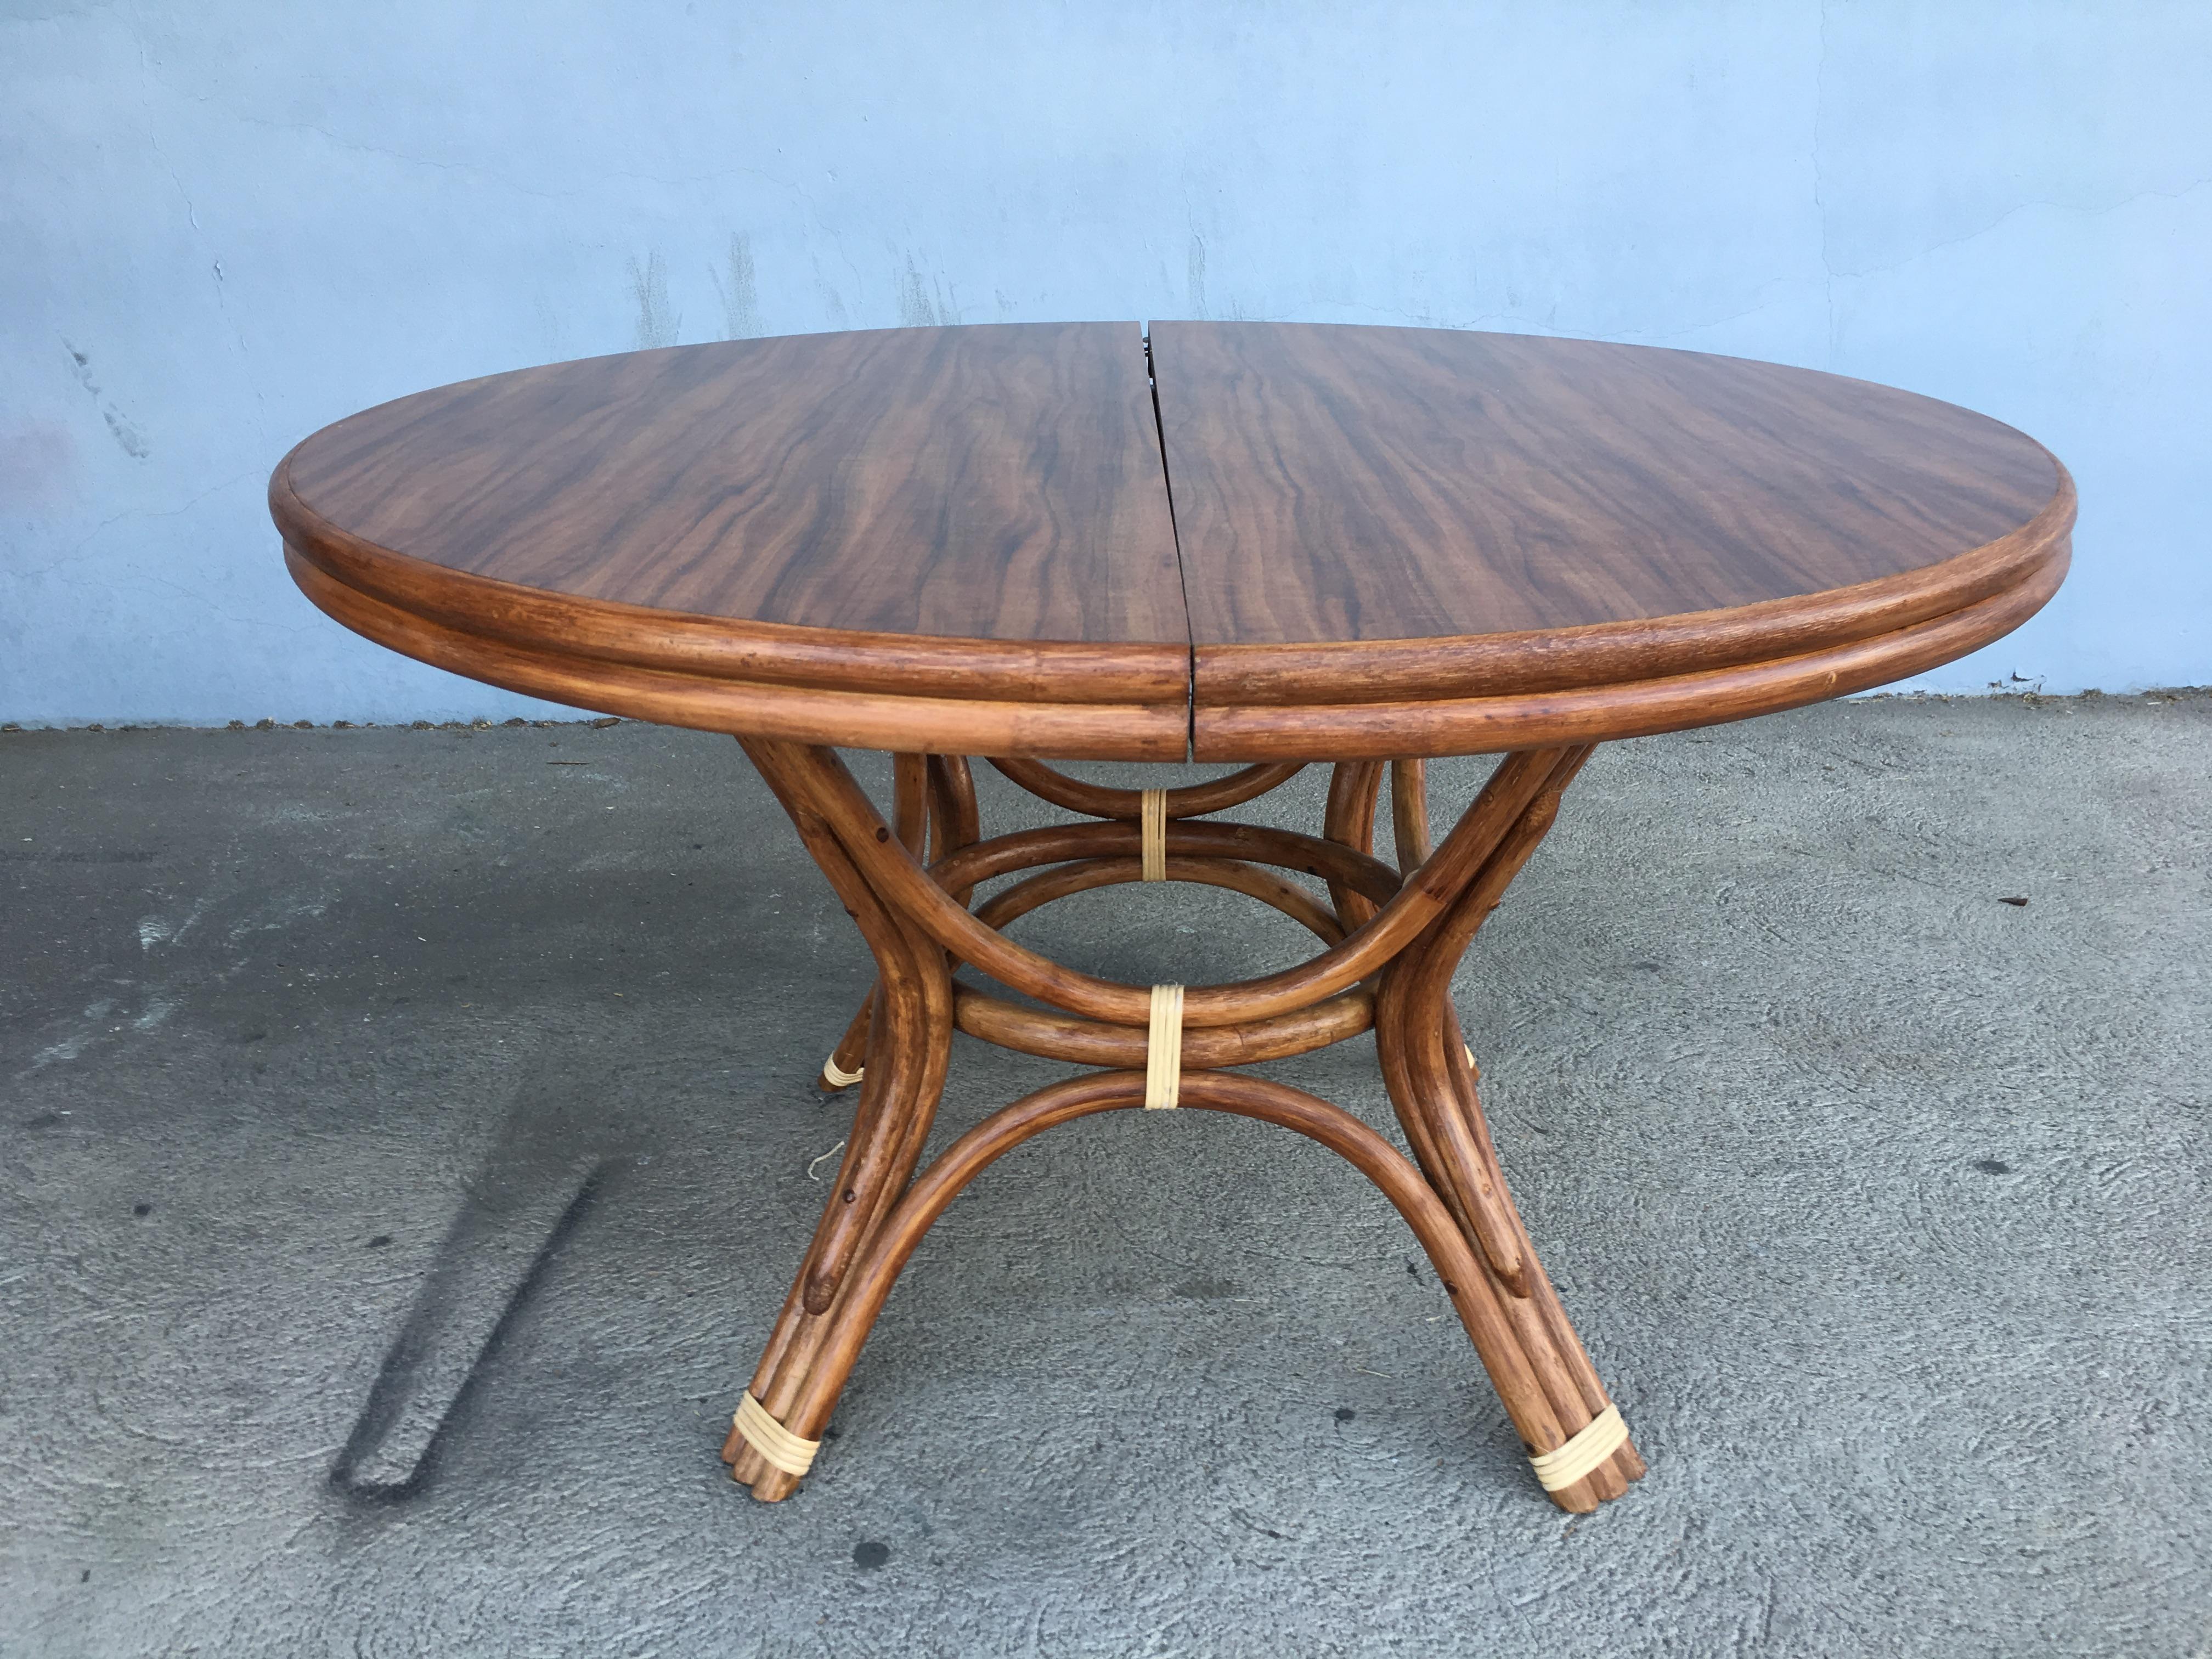 Restored round rattan dining table with original Formica top complete with two leaves for easy expansion from a 4 to 8 person table setting. Restored to new for you. All rattan, bamboo and wicker furniture has been painstakingly refurbished to the